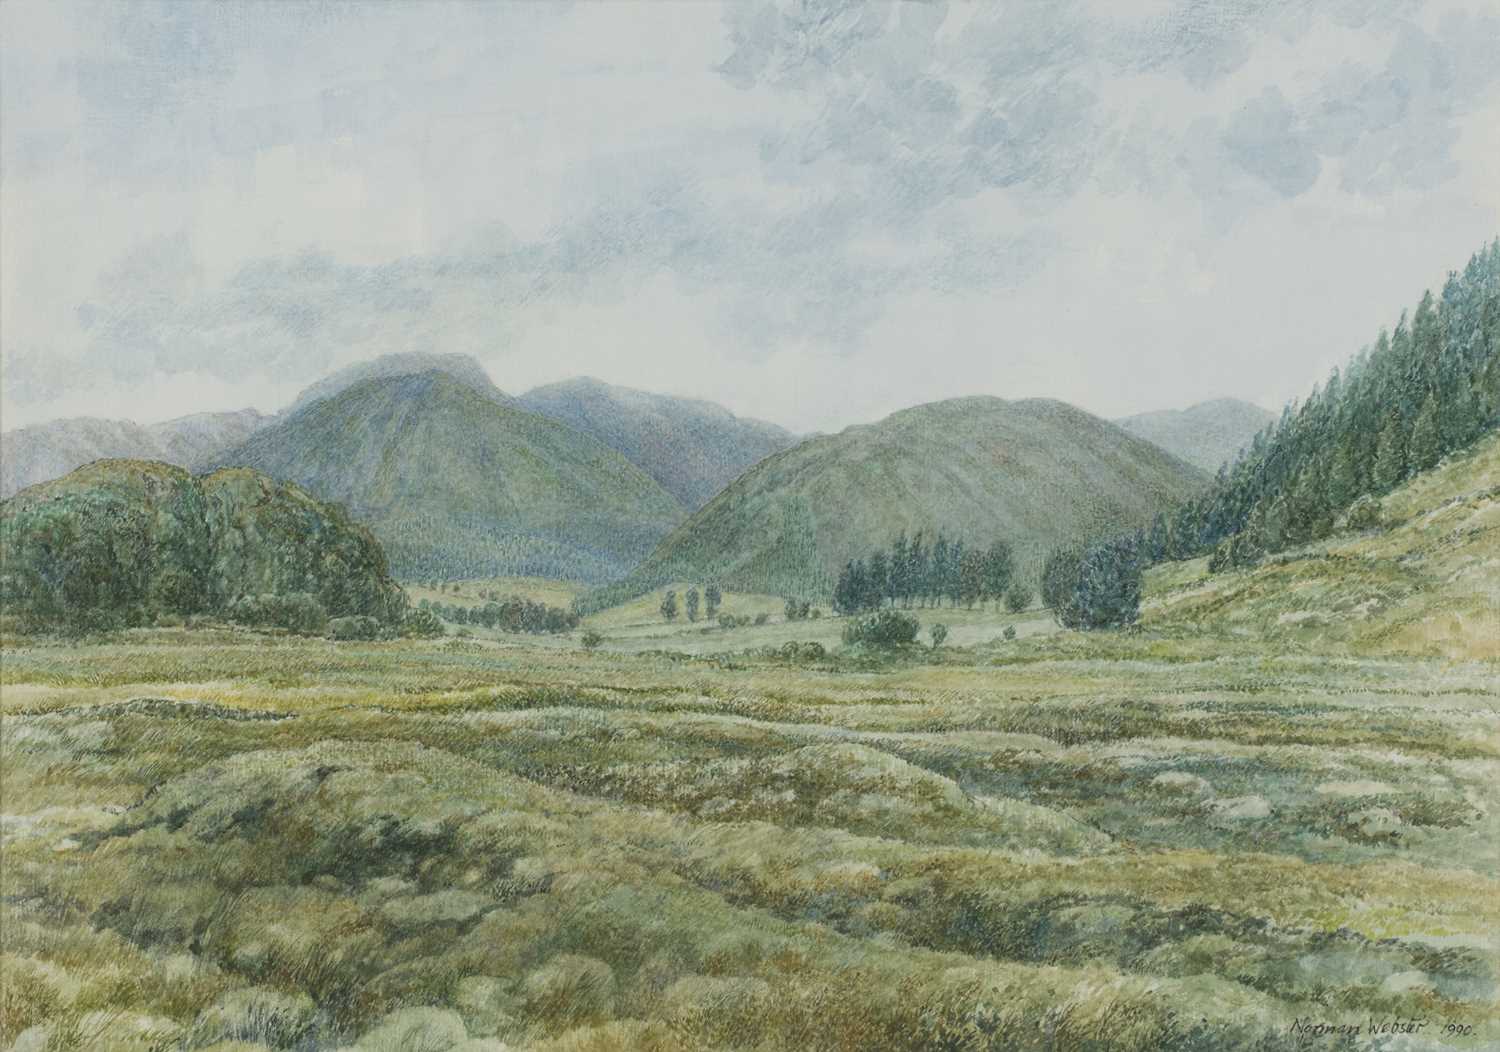 Norman Webster (20th century) 'Mountains near Inversheil, Wester Ross', signed and dated 1990,